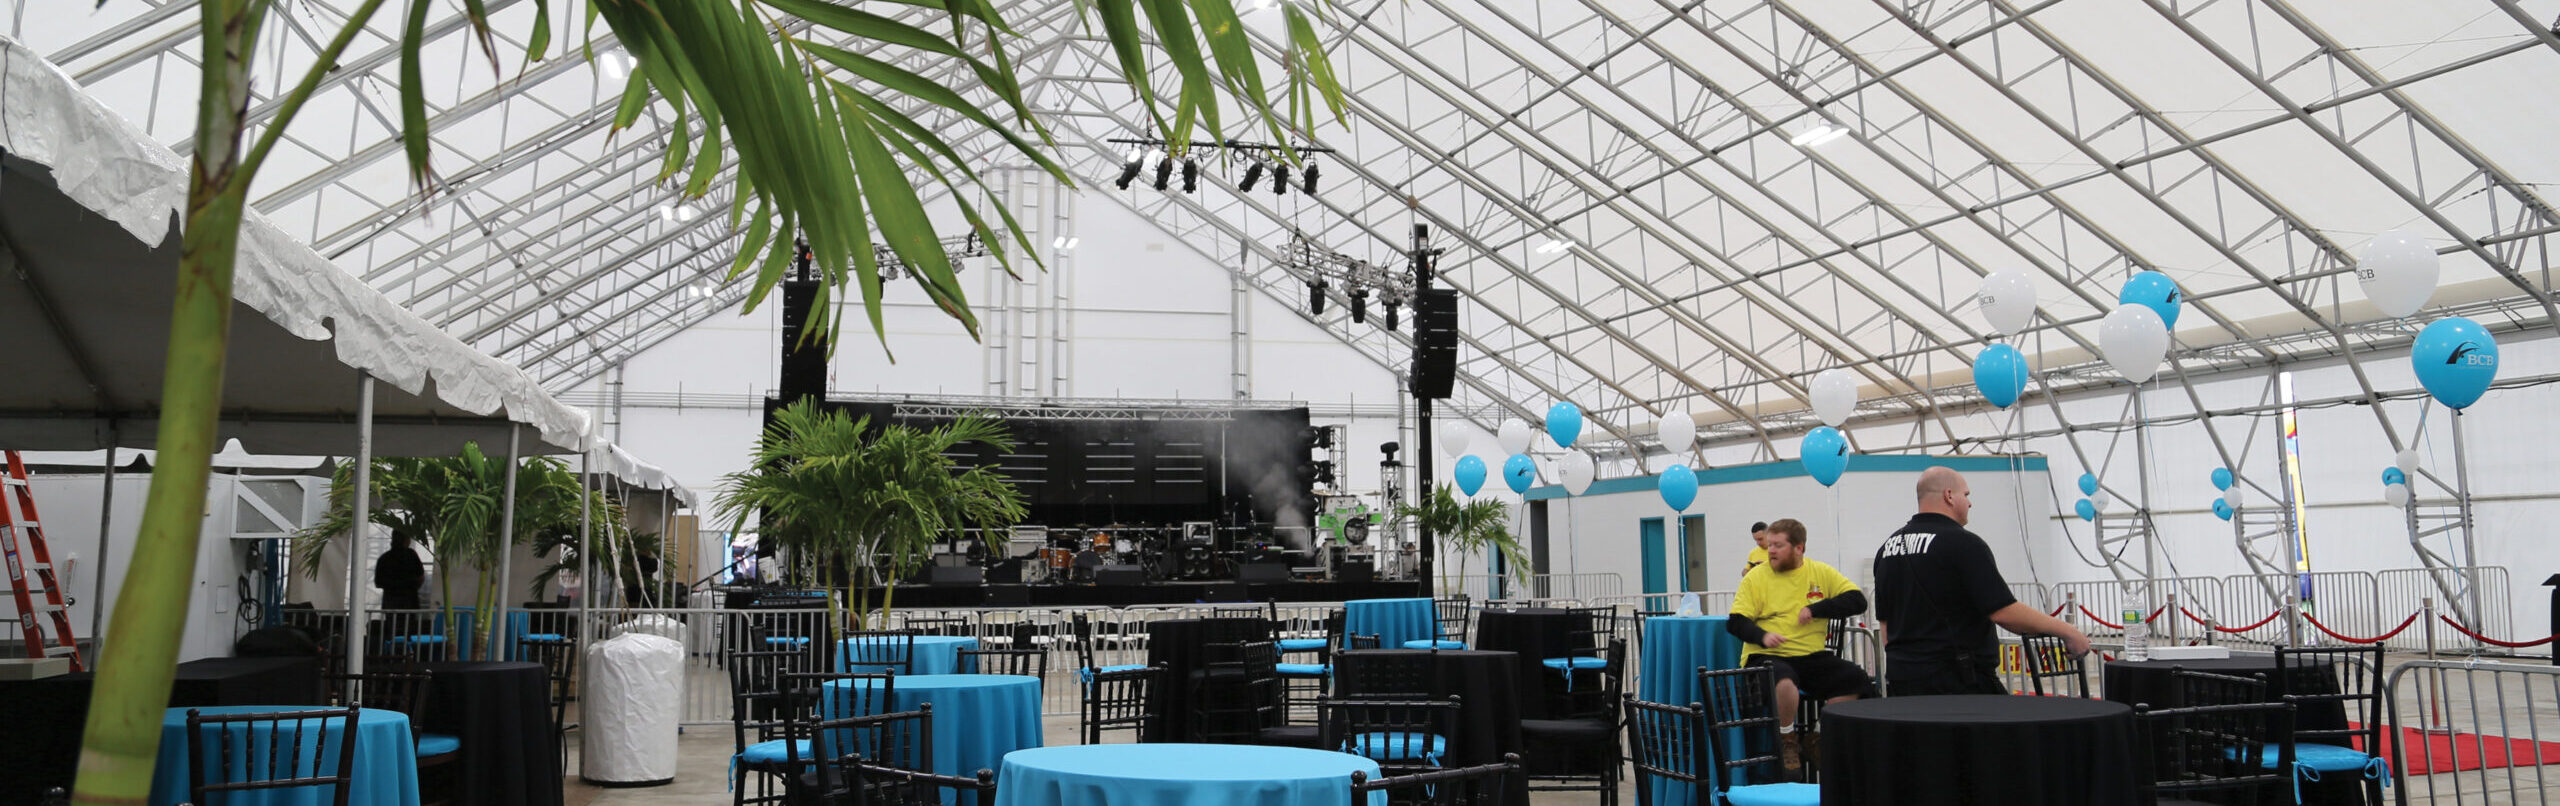 event with tables under fabric structure